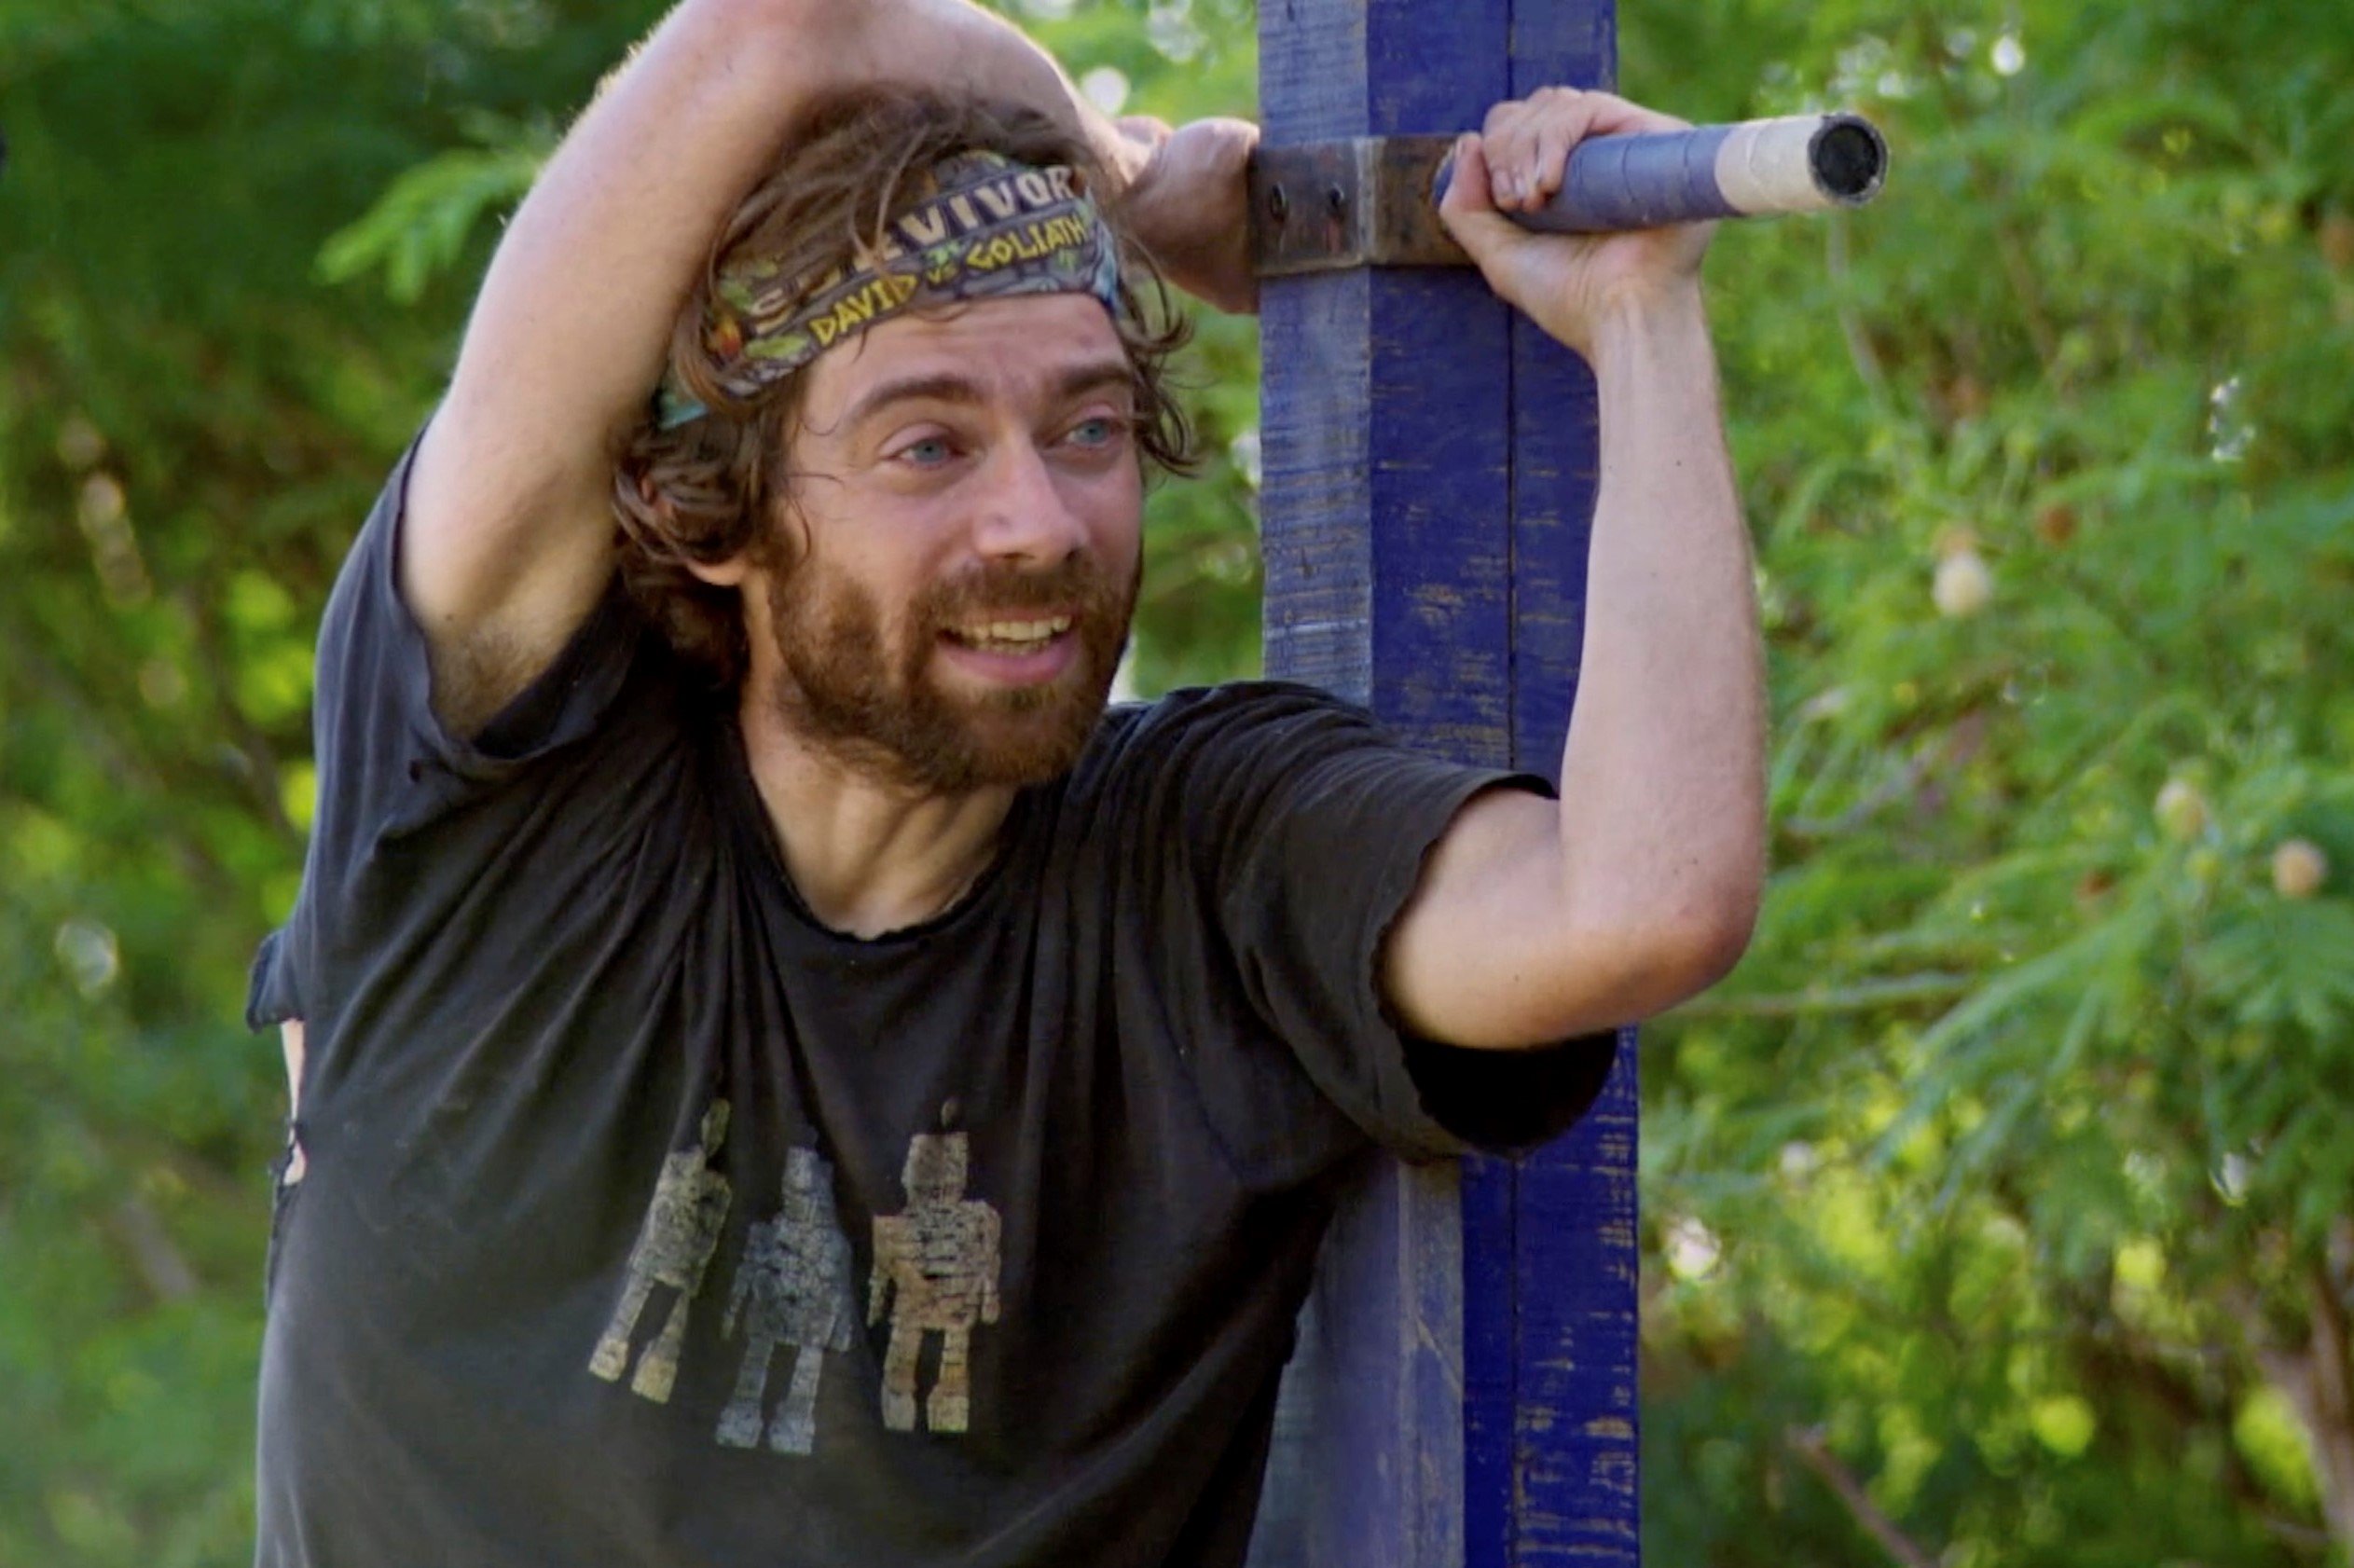 ‘Survivor’ Fans Speculate Which Castaways Could Return in an All-Stars Season